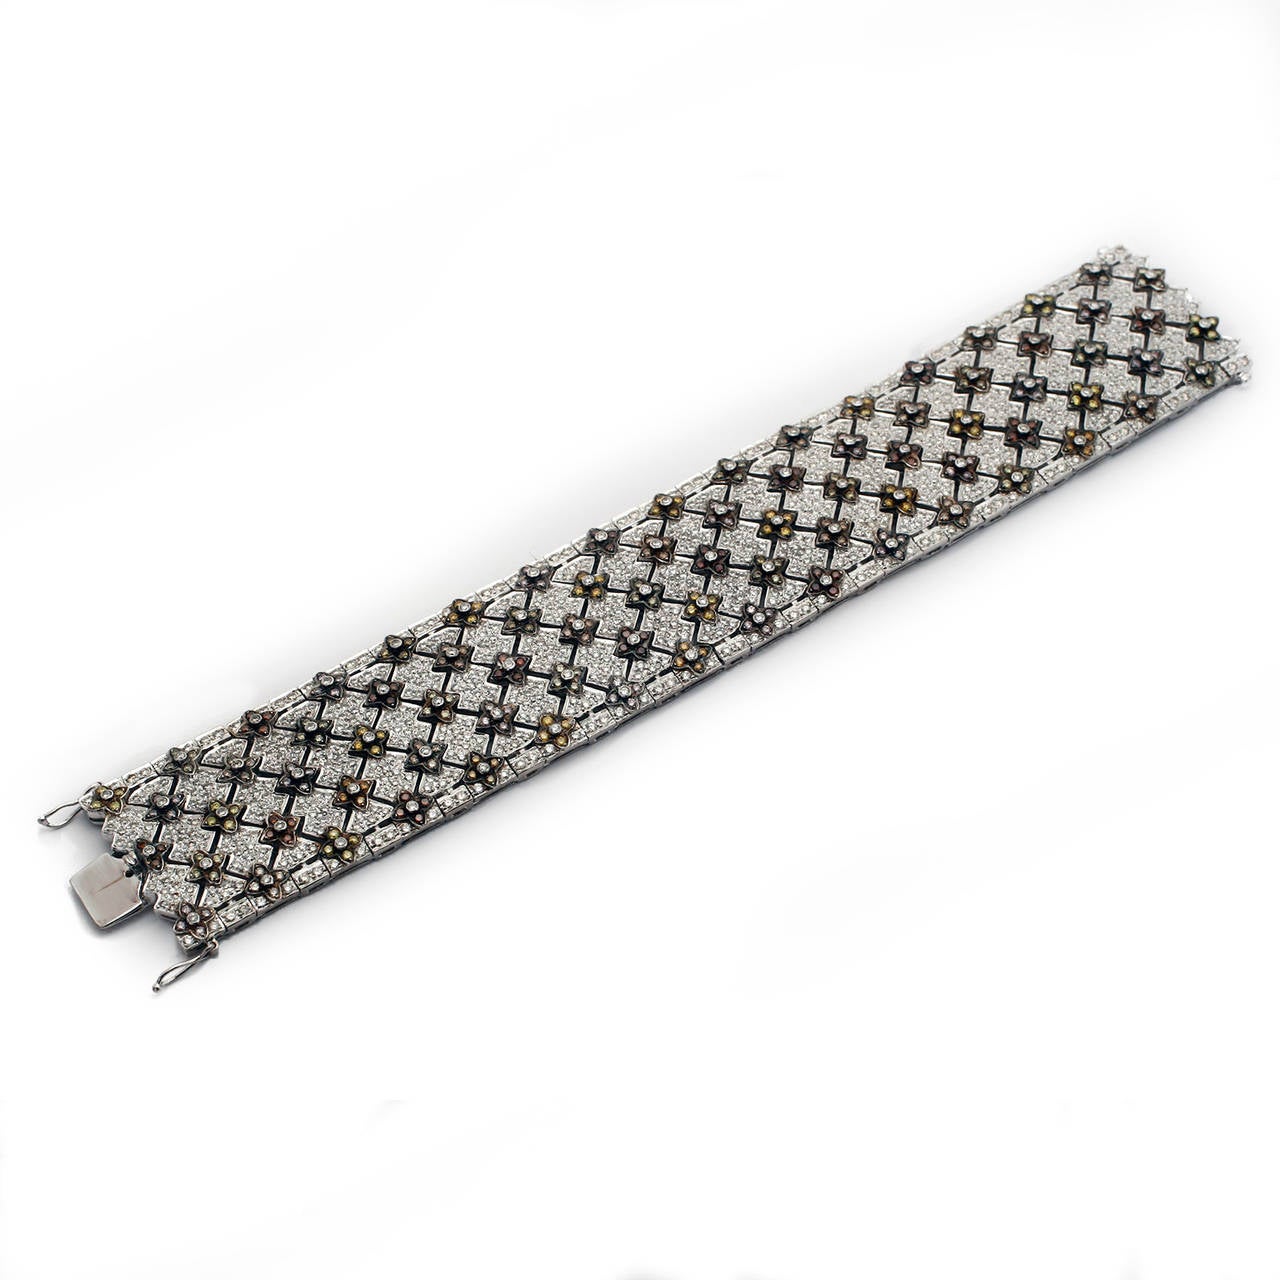 18K White Gold MULTI-COLOR NATURAL FANCY DIAMOND WIDE BRACELET 17.69CTW. A Wonderful array of natural color diamond shades including, Pinks, Purples, Yellows, Oranges, Greens, Russets, and White Diamonds. An incredible assortment.